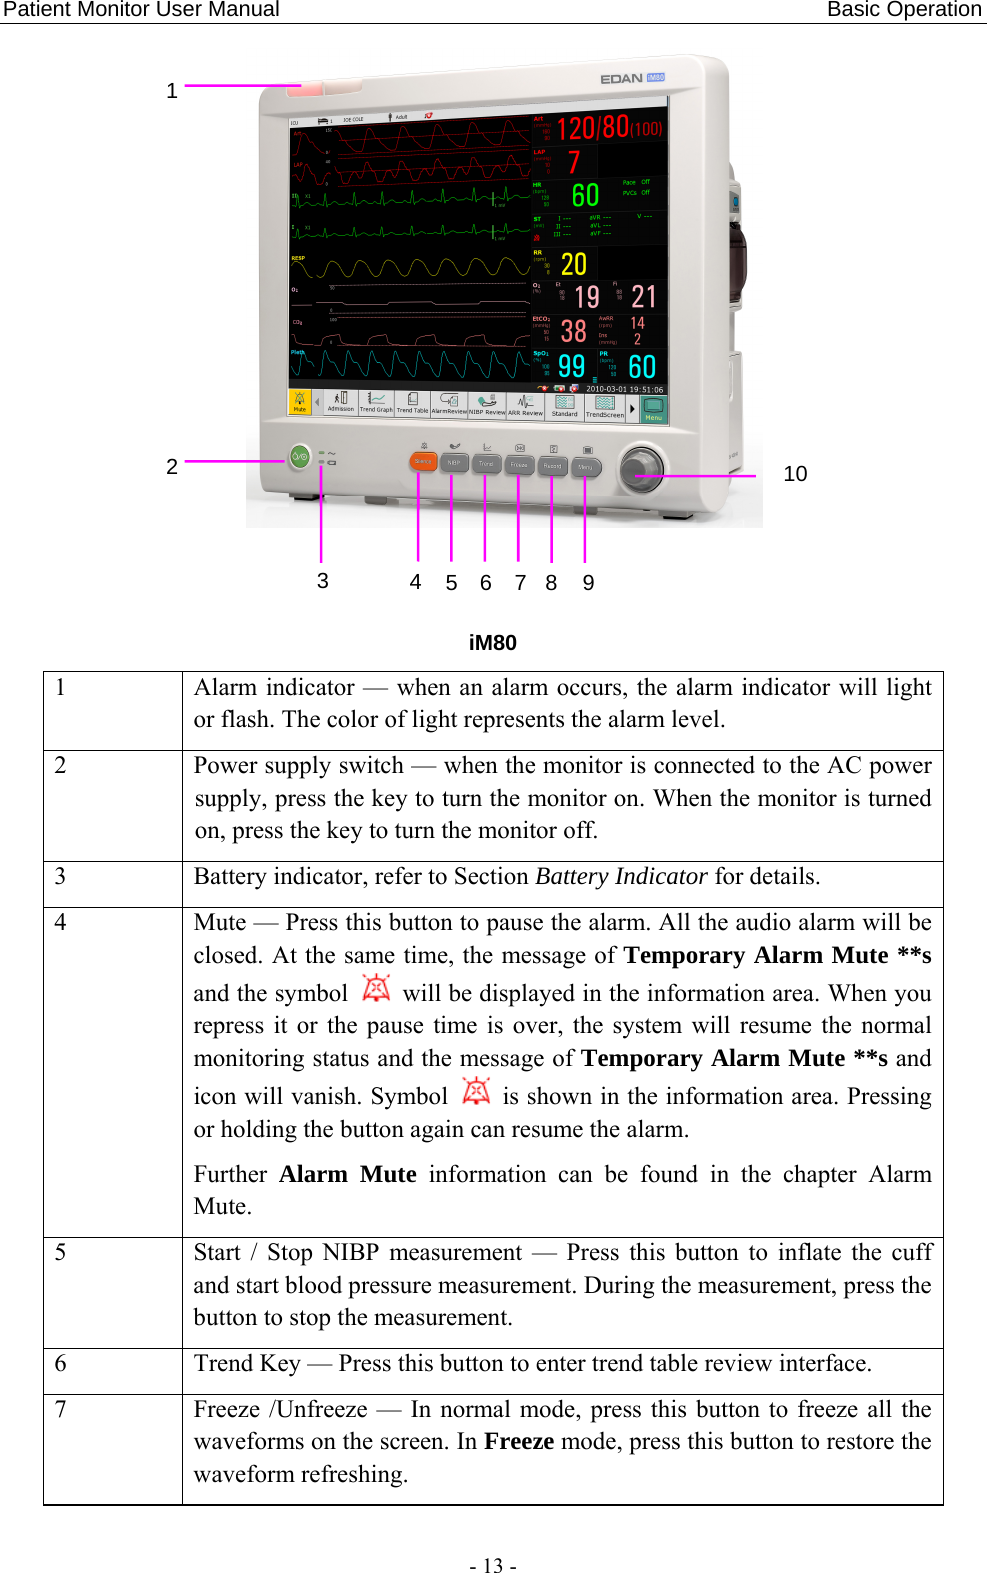 Patient Monitor User Manual                                                  Basic Operation  - 13 -  iM80 1  Alarm indicator — when an alarm occurs, the alarm indicator will light or flash. The color of light represents the alarm level.   2  Power supply switch — when the monitor is connected to the AC power supply, press the key to turn the monitor on. When the monitor is turned on, press the key to turn the monitor off.   3  Battery indicator, refer to Section Battery Indicator for details.   4  Mute — Press this button to pause the alarm. All the audio alarm will be closed. At the same time, the message of Temporary Alarm Mute **s and the symbol    will be displayed in the information area. When you repress it or the pause time is over, the system will resume the normal monitoring status and the message of Temporary Alarm Mute **s and icon will vanish. Symbol    is shown in the information area. Pressing or holding the button again can resume the alarm.   Further  Alarm Mute information can be found in the chapter Alarm Mute. 5  Start / Stop NIBP measurement — Press this button to inflate the cuff and start blood pressure measurement. During the measurement, press the button to stop the measurement. 6  Trend Key — Press this button to enter trend table review interface.   7  Freeze /Unfreeze — In normal mode, press this button to freeze all the waveforms on the screen. In Freeze mode, press this button to restore the waveform refreshing. 3 2 1 45678910 